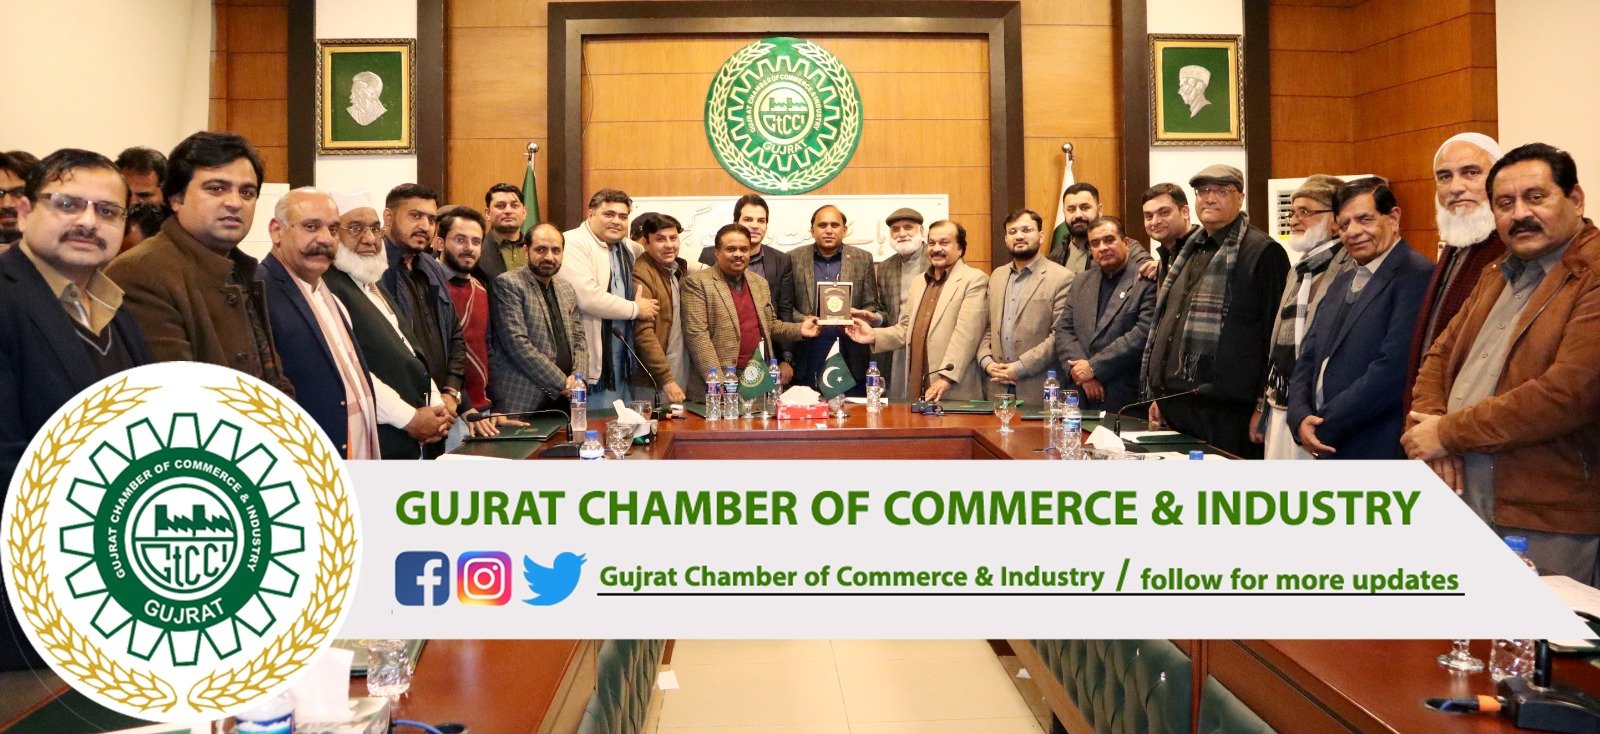 A #delegation of Newly Elected Office Bearers of Gujrat Press Club official and members of Gujrat Press Club  visited Gujrat Chamber of Commerce & Industry .